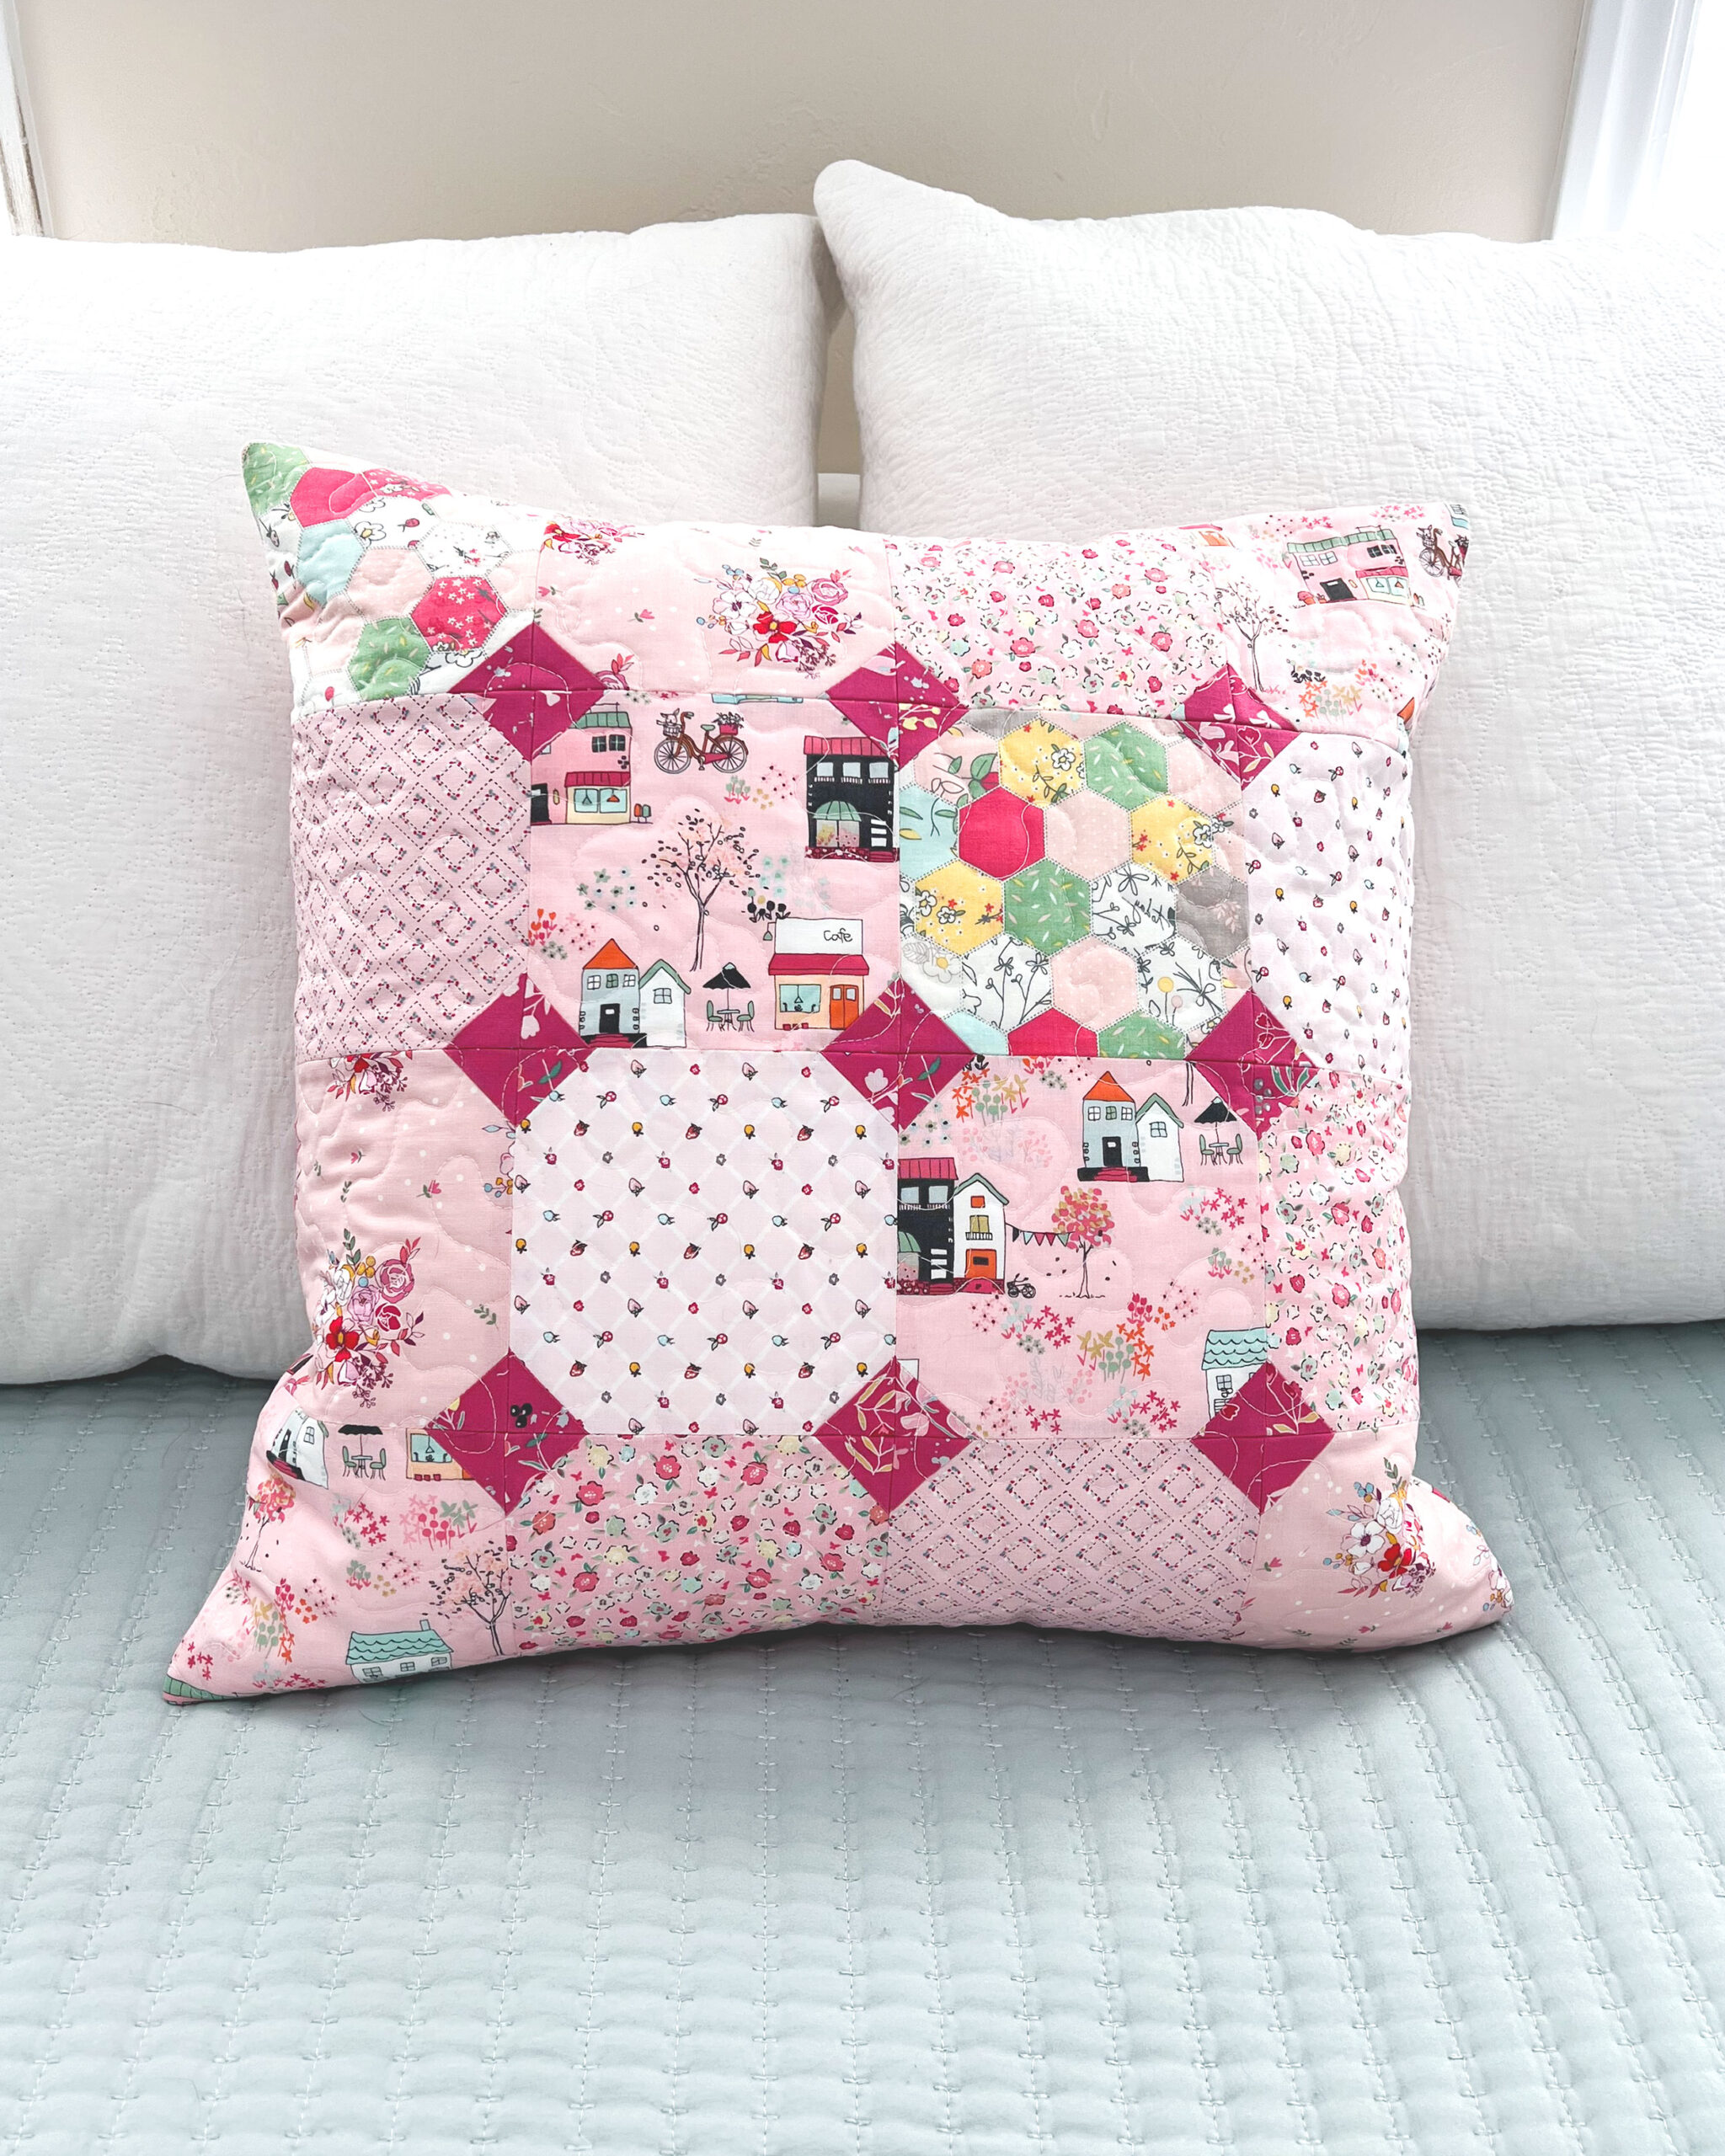 How to Make a Patchwork Cushion The Easy Way